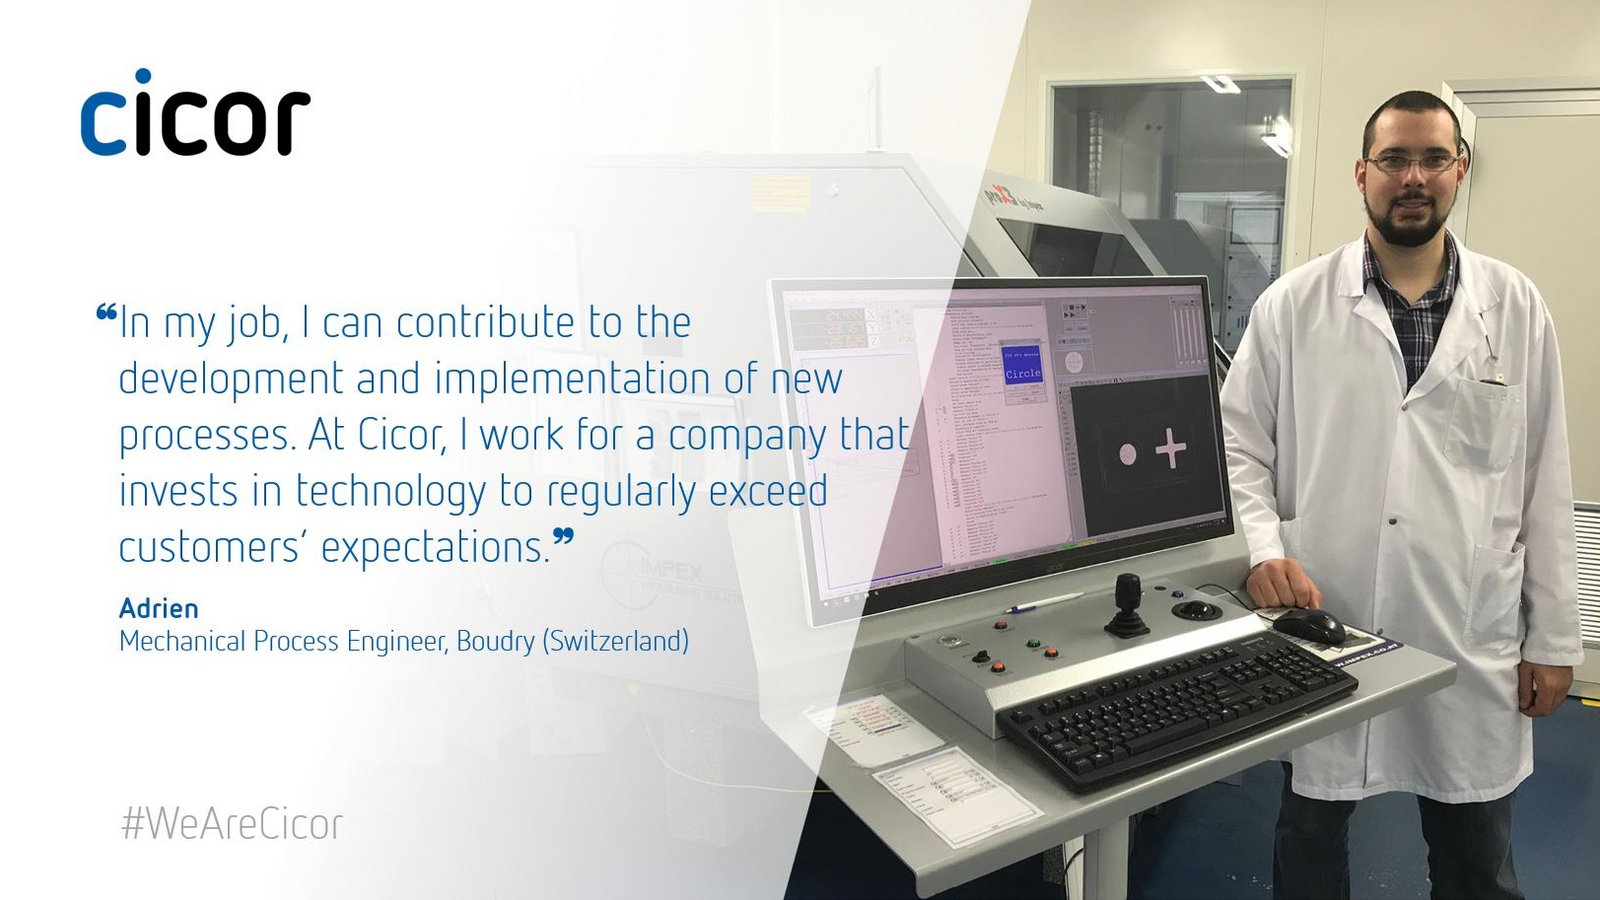 Testimonial of Adrien who works at the Cicor site in Boudry